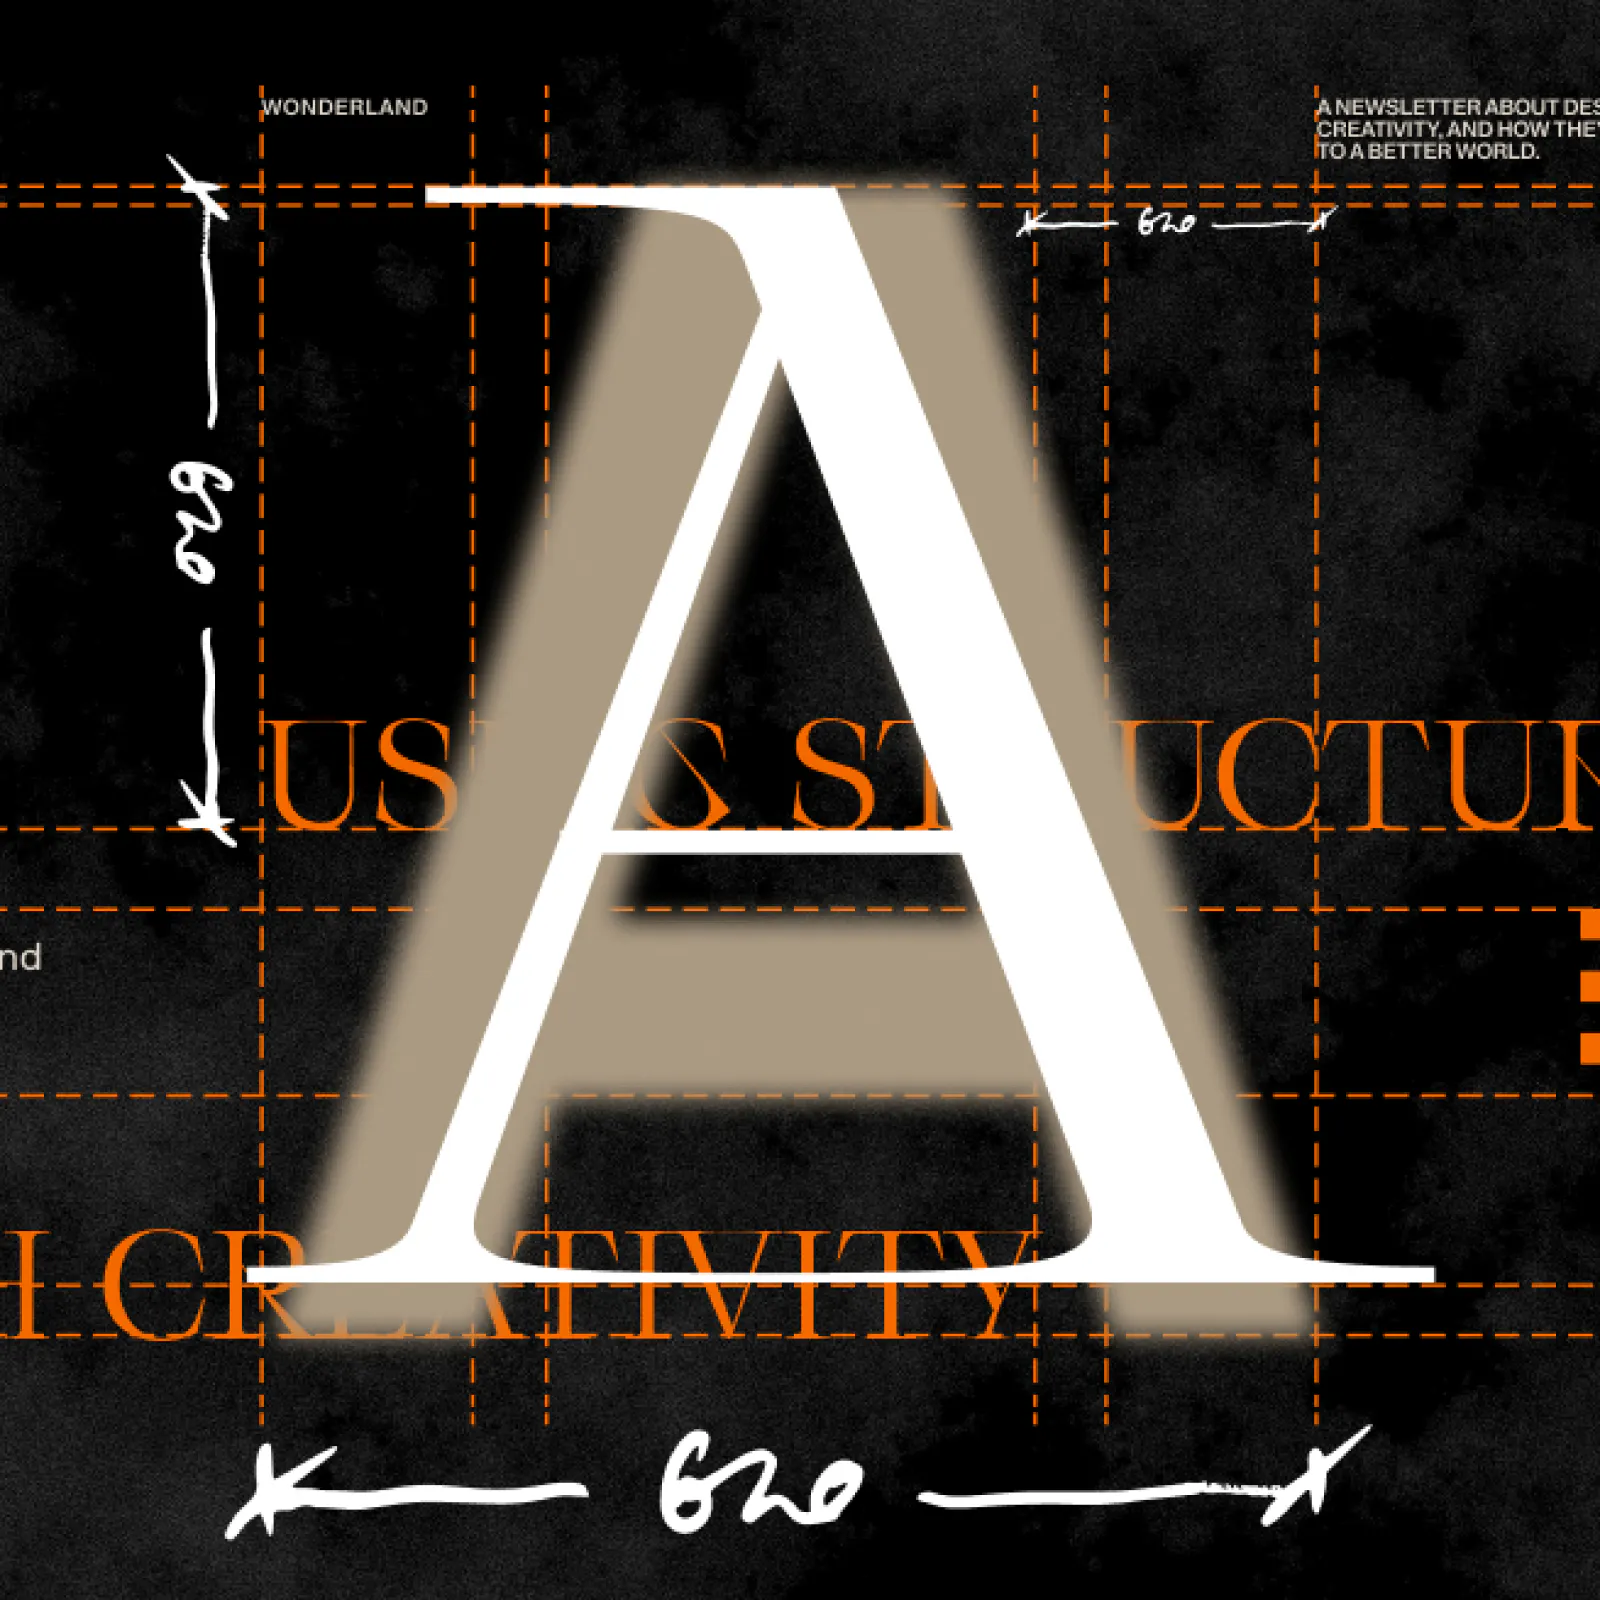 Large 'A' graphic - Ideas (Ideas Page)